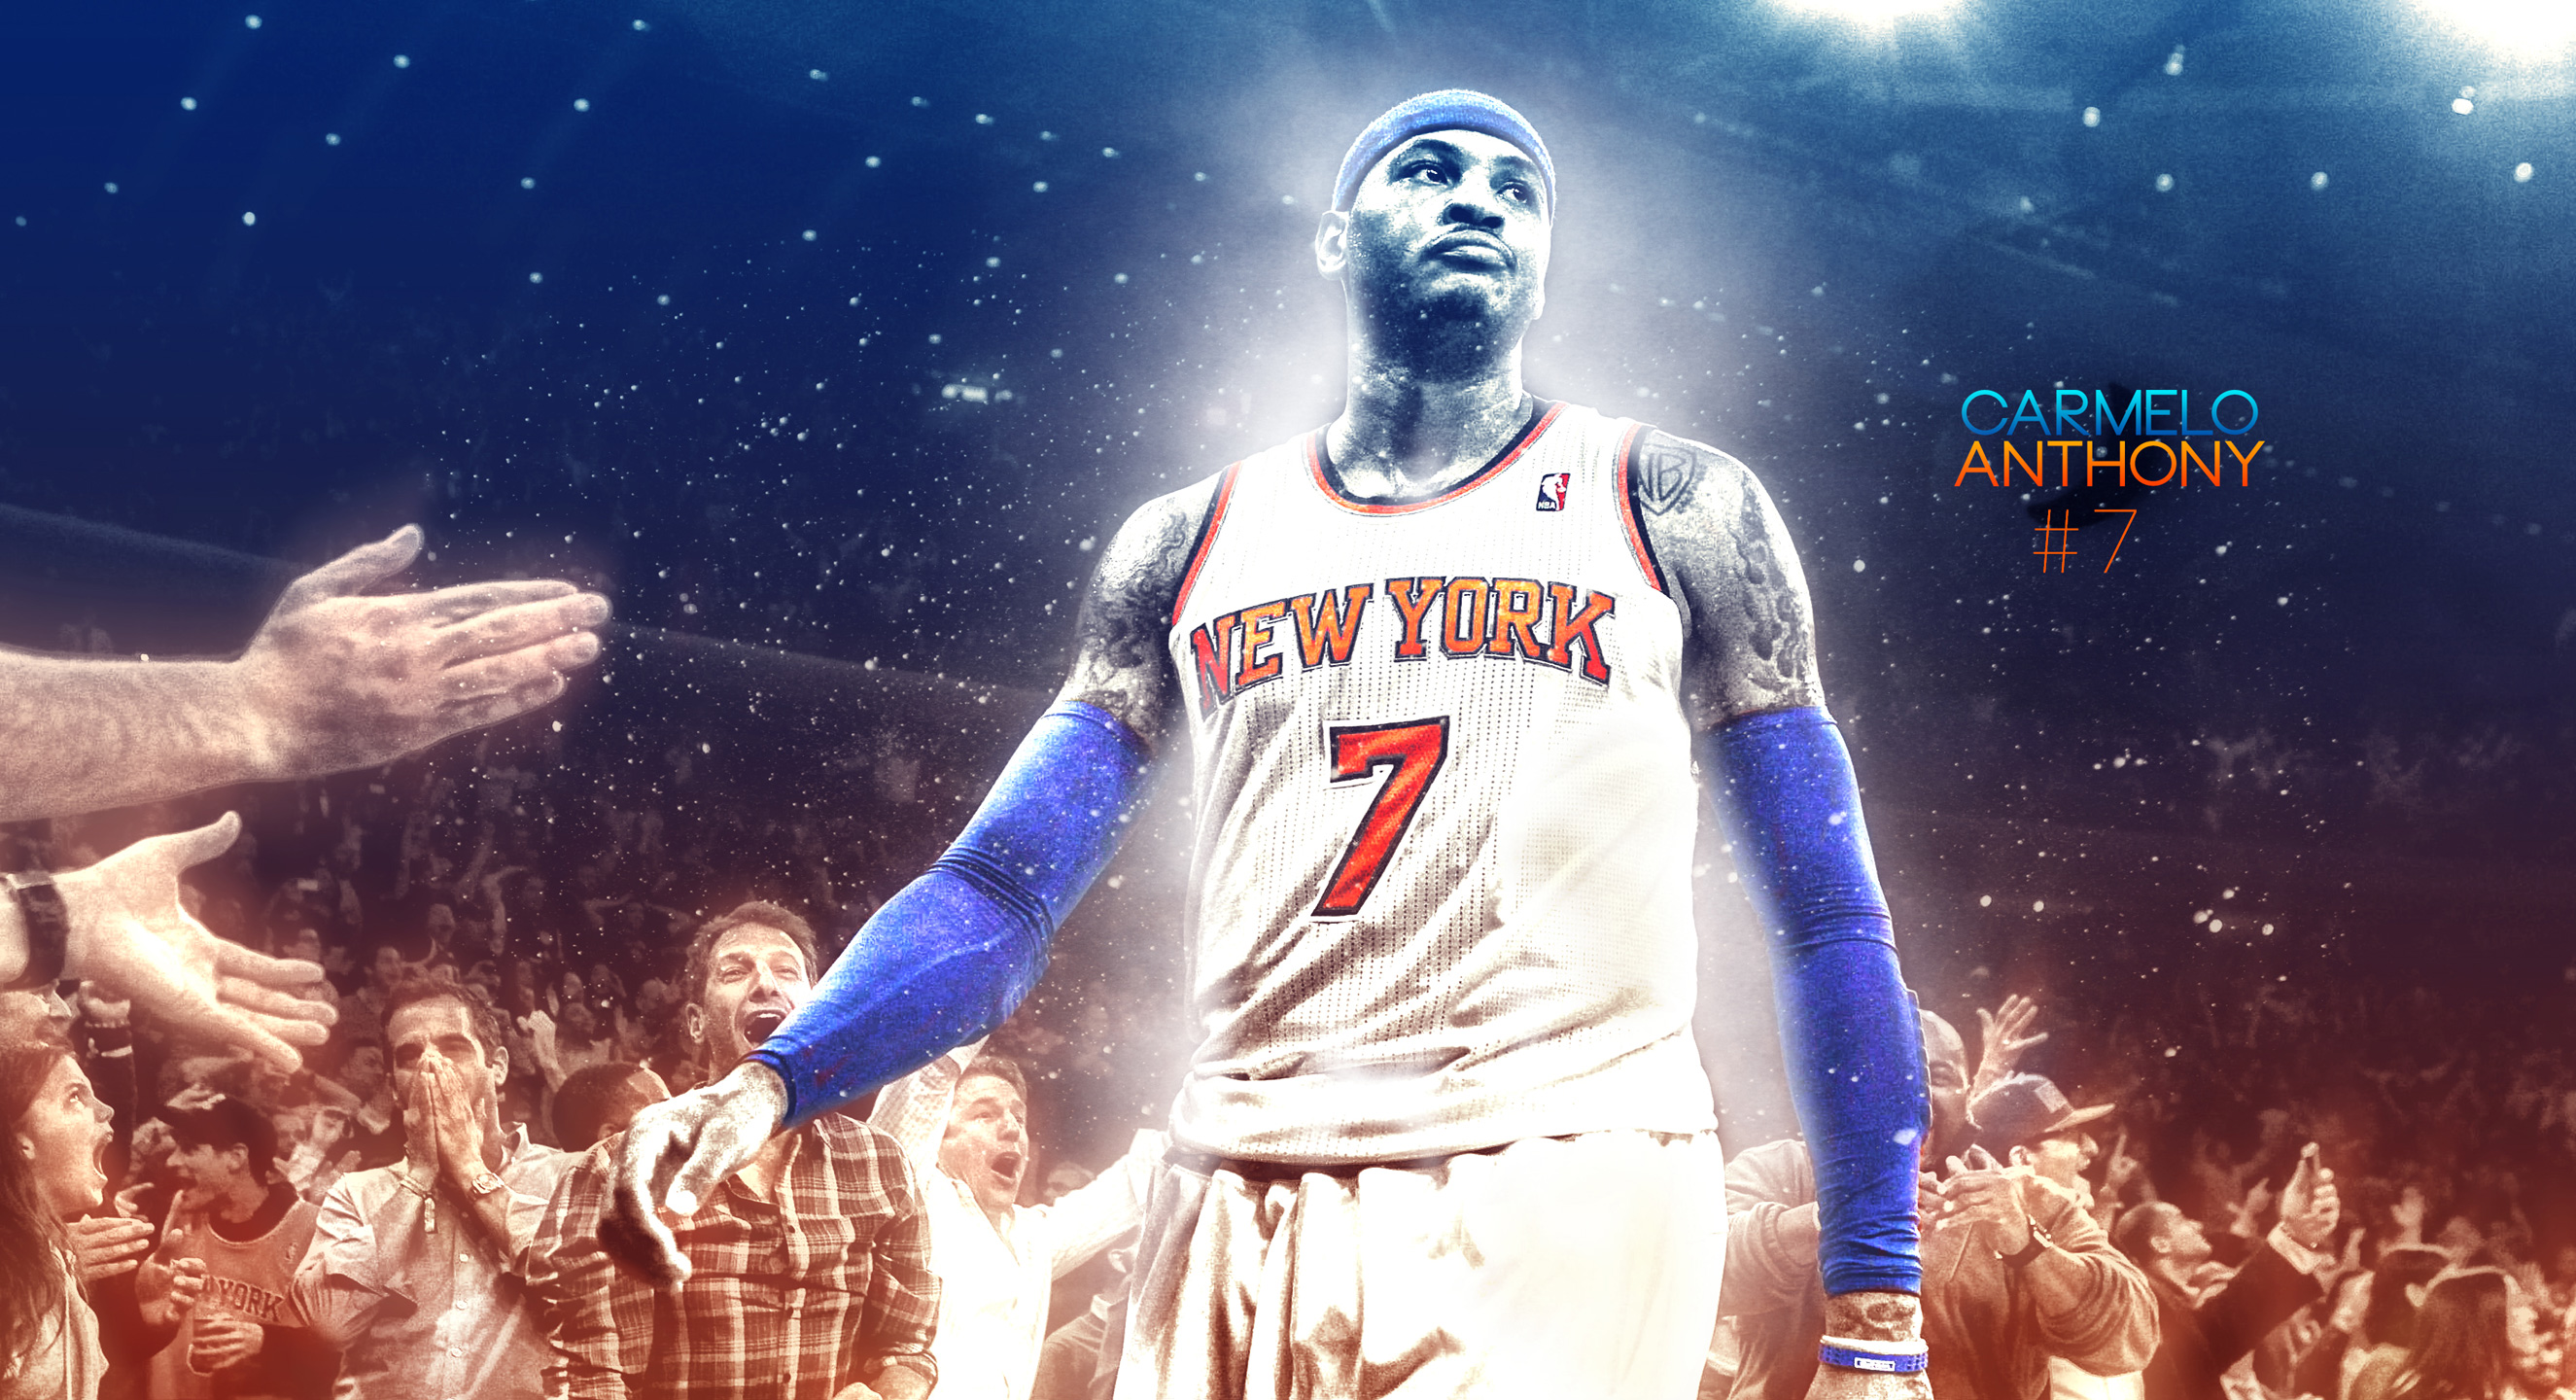 2012 NBA All-Star Carmelo Anthony Wallpaper  Basketball Wallpapers at